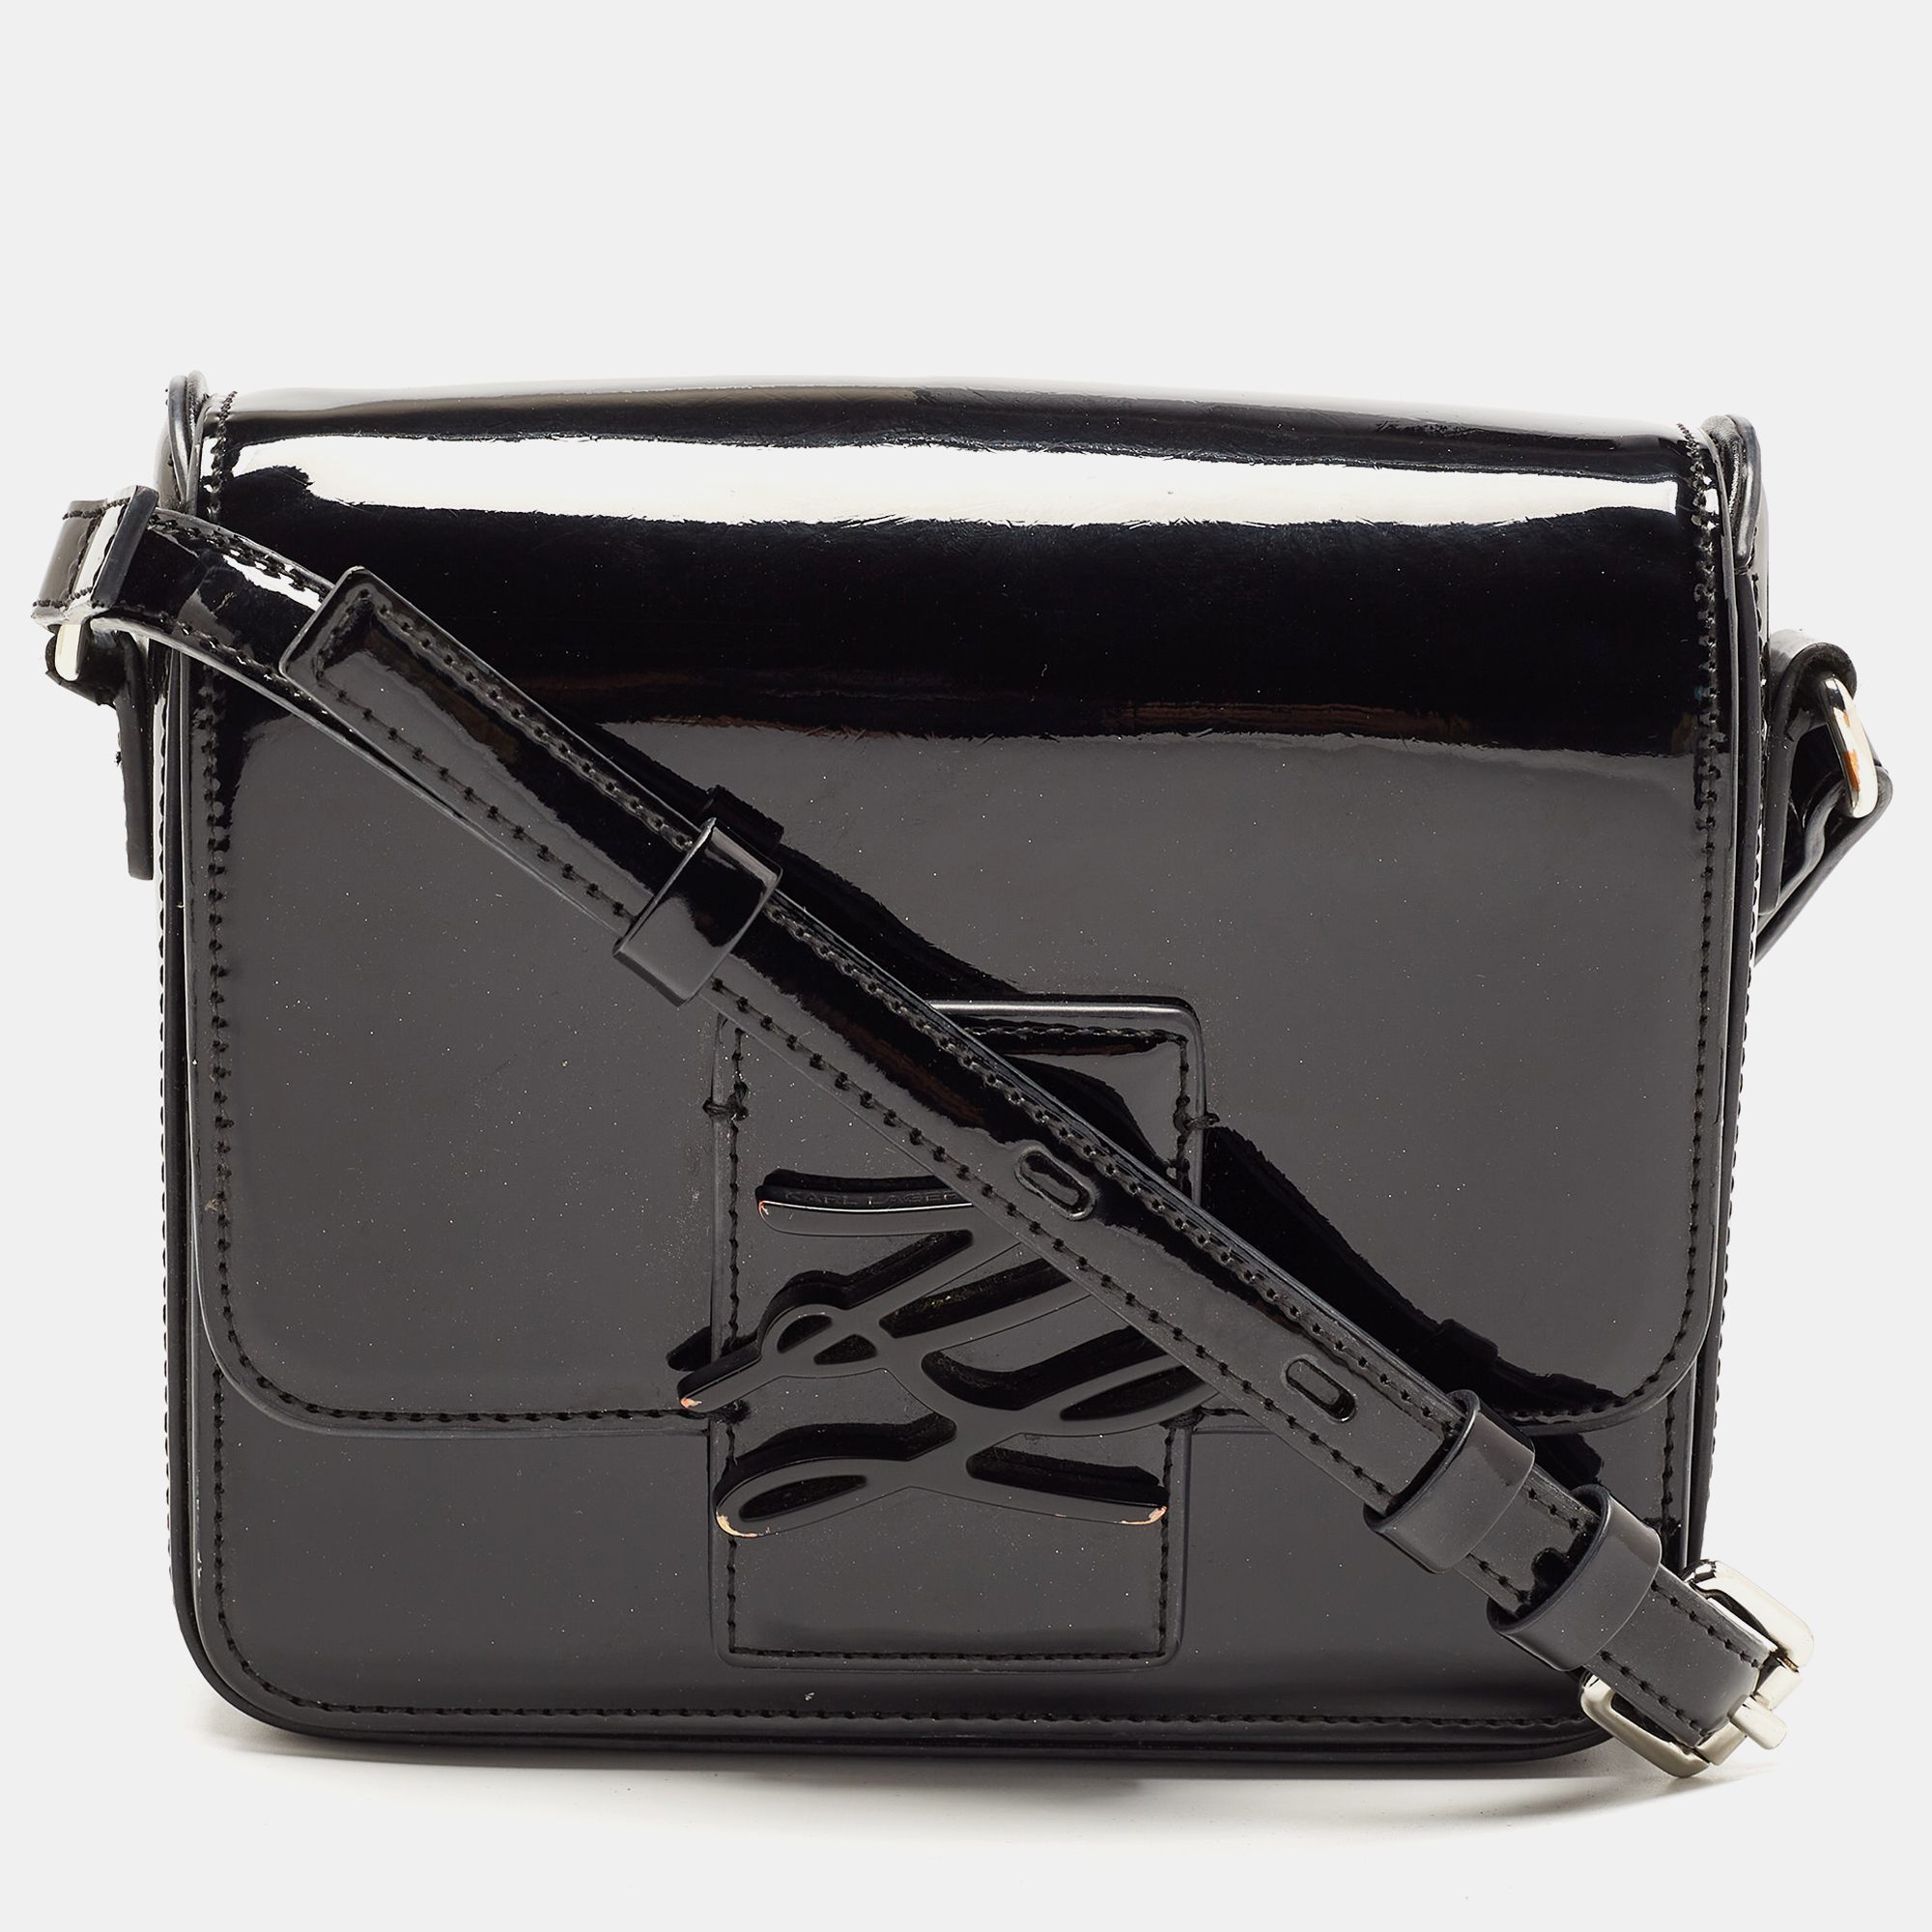 This Karl Lagerfeld bag will uplift your style quotient and take it a notch higher. Crafted from black hued patent leather it features the brand logo in the front. It is styled with a shoulder strap silver tone hardware and a fabric lined interior.